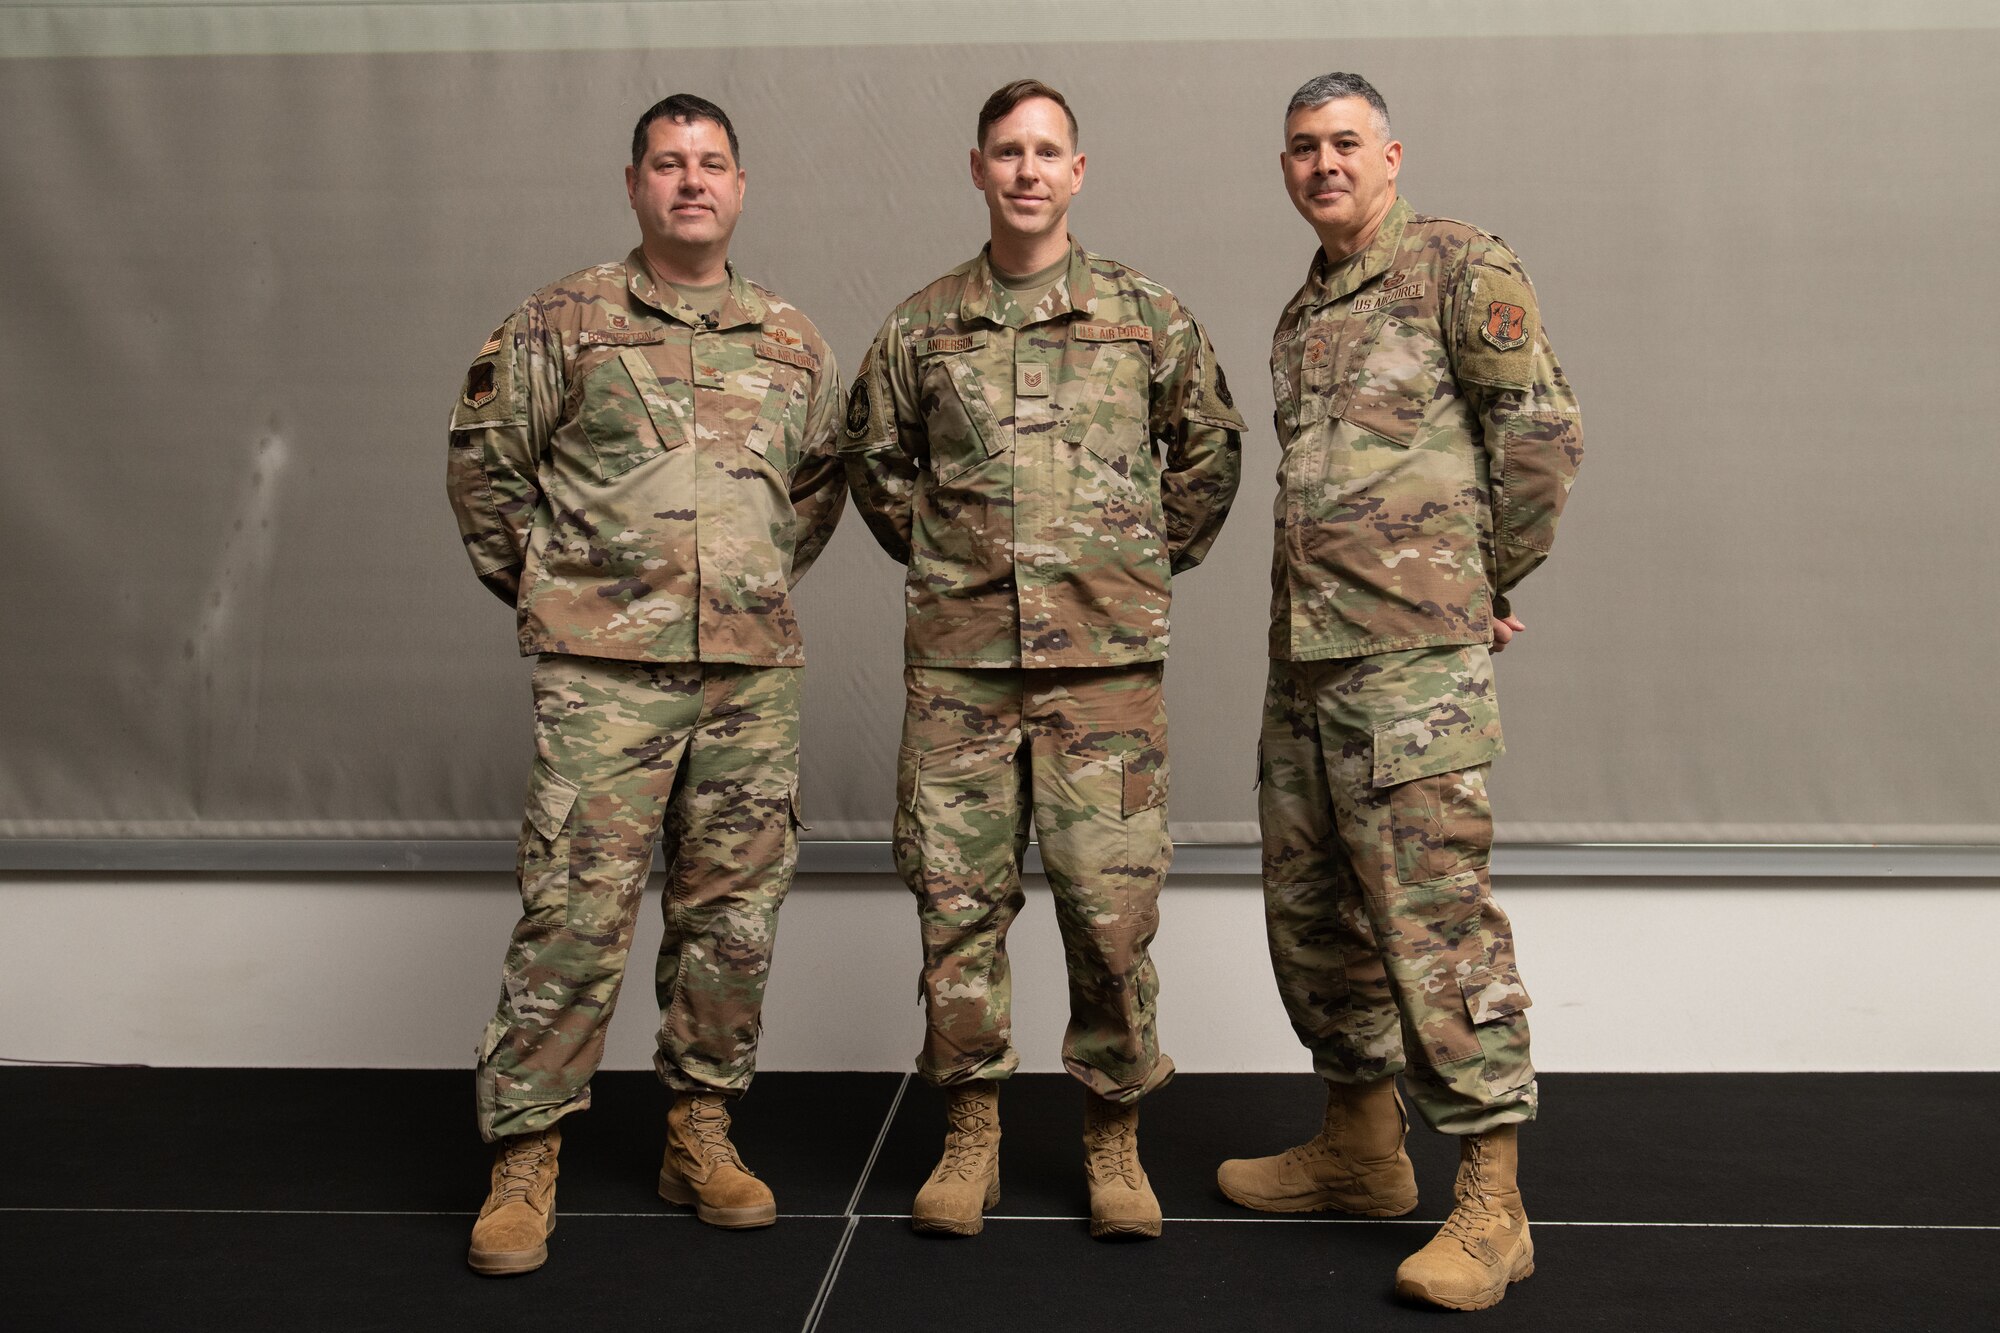 From left, Col. Christopher G. Batterton, 192nd Wing commander, Tech. Sgt. Jason Anderson, 192nd Maintenance Squadron test cell certifier, and Chief Master Sgt. Richard Roberts, 192nd Wing command chief, pose for a photo.